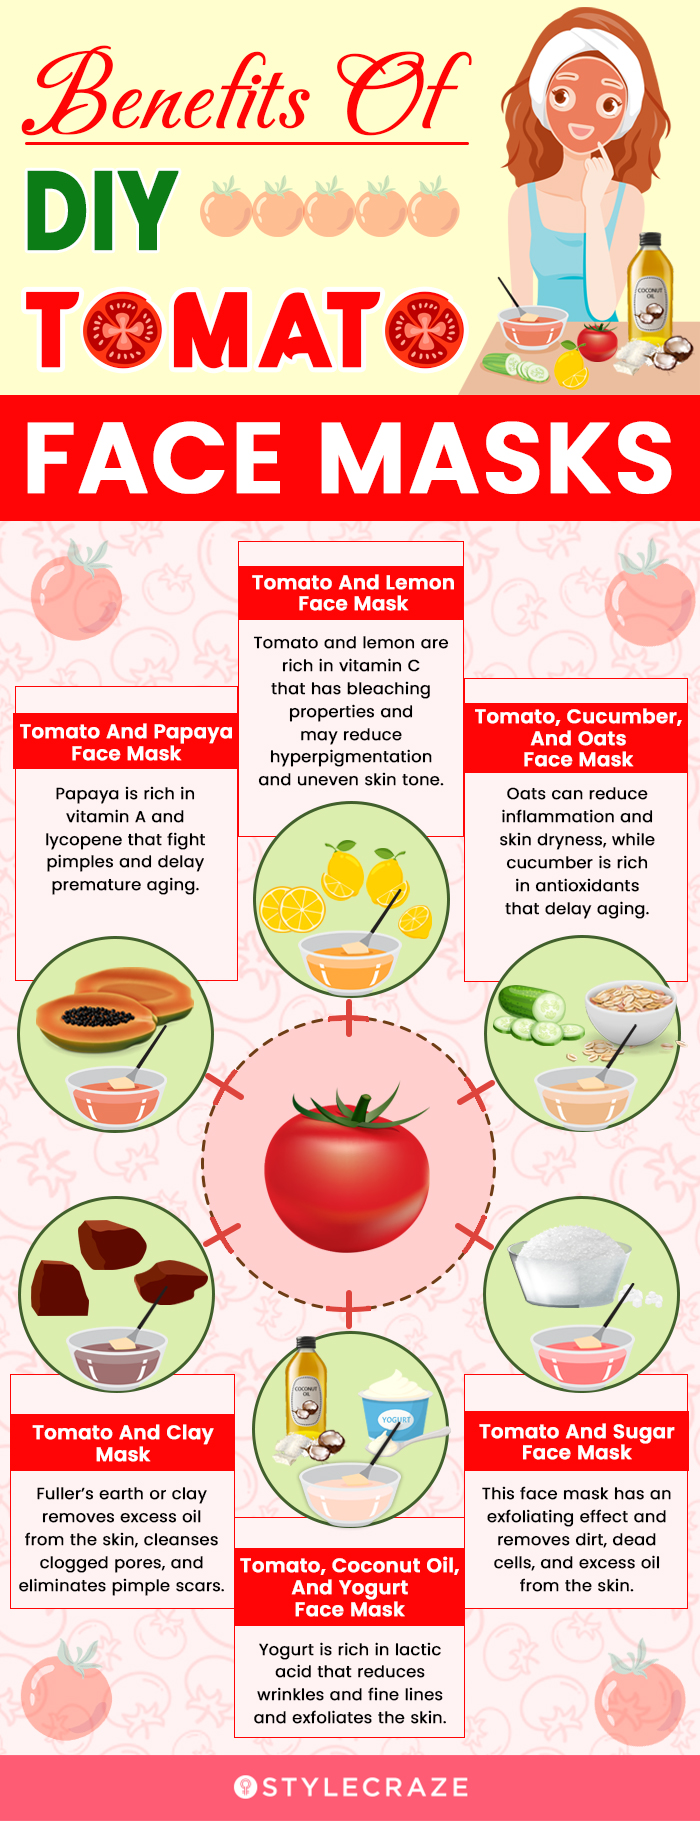 benefits of some important diy tomato face masks [infographic]